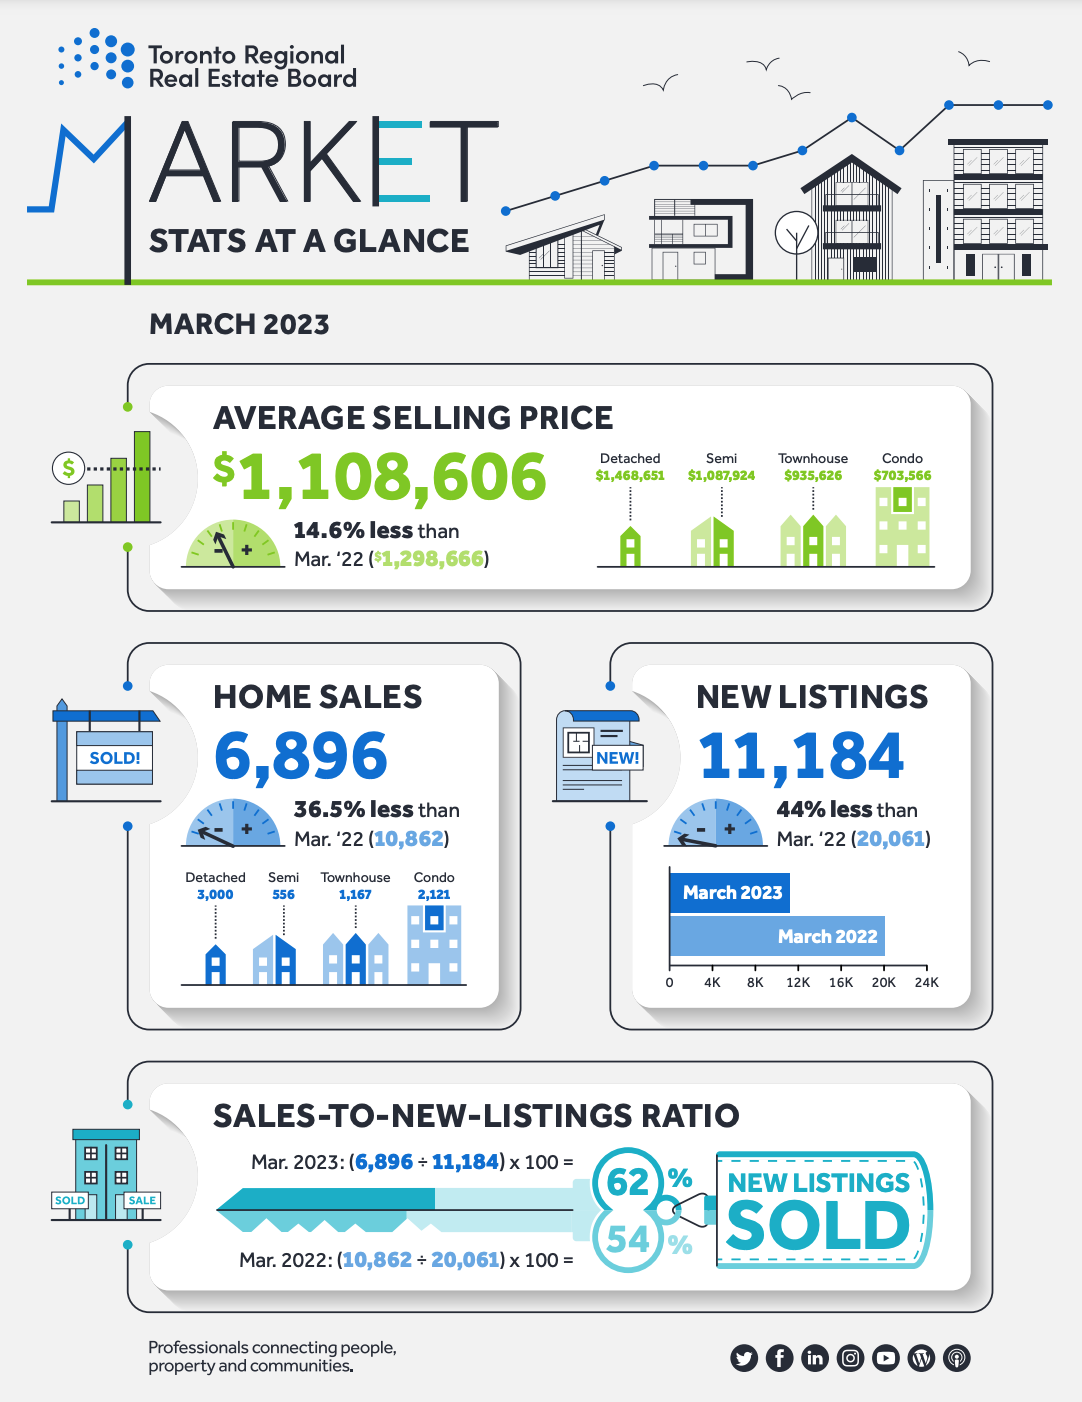 Toronto Regional Real Estate Board - Market Stats At A Glance - March 2023